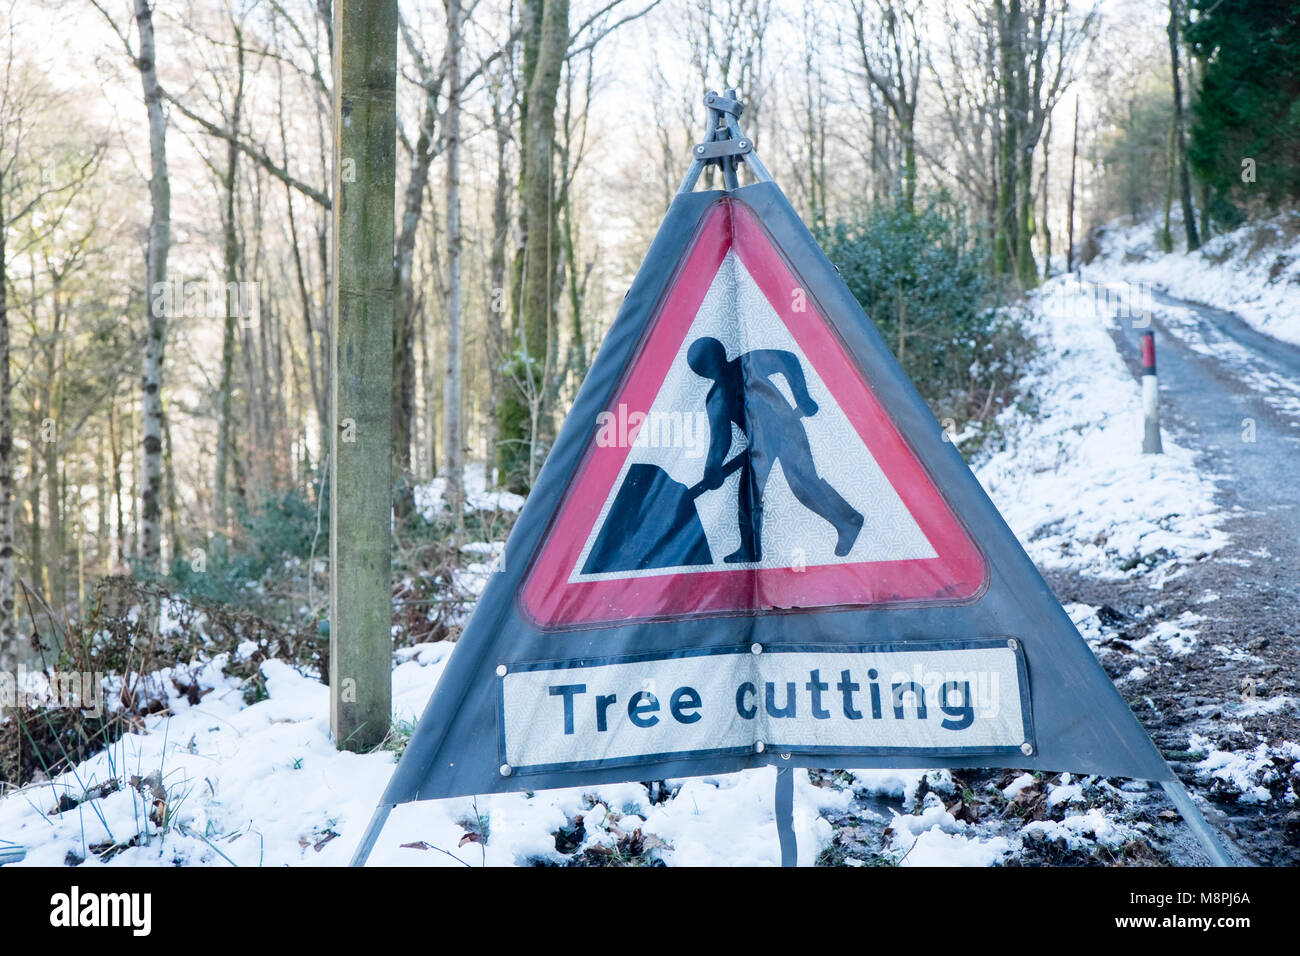 Tree cutting,sign,warning,notice,signage,in,forest,woods,while workers,remove,fallen,tree,near,Furnace,hamlet,Ceredigion,Mid,Wales,UK,U.K.,Europe, Stock Photo